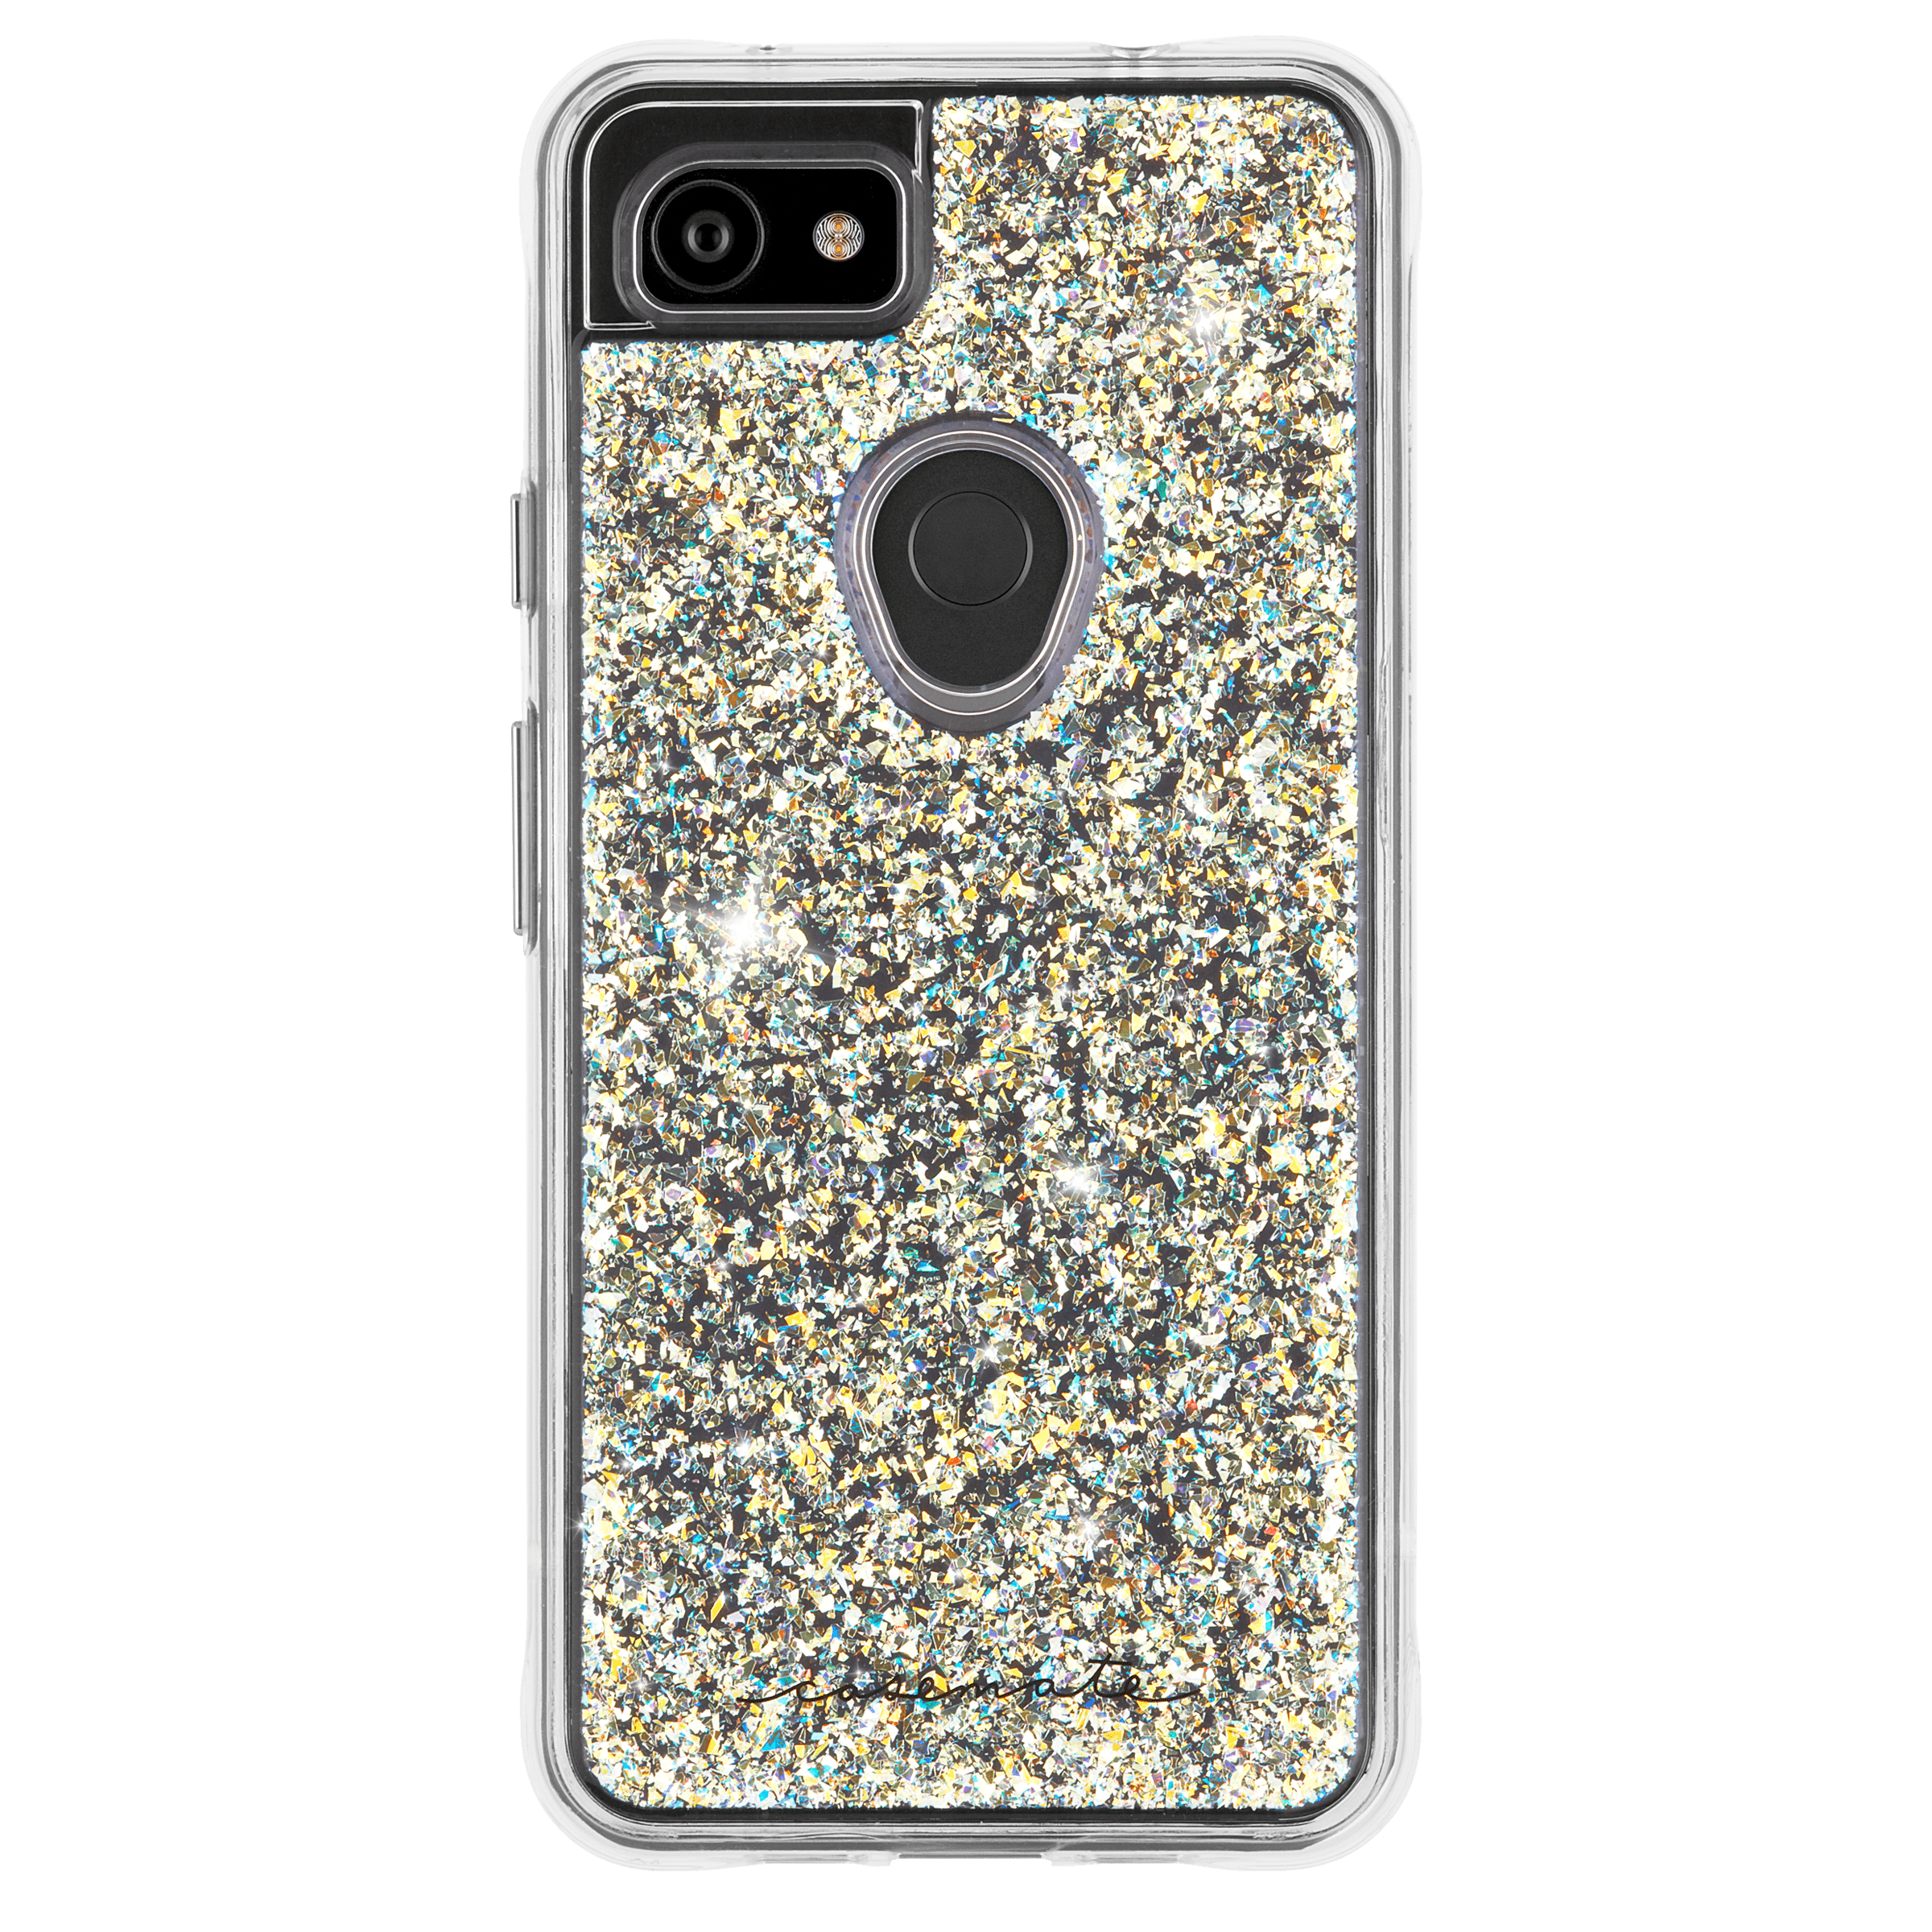 Twinkle protective case for Pixel 3a color::Twinkle Stardust